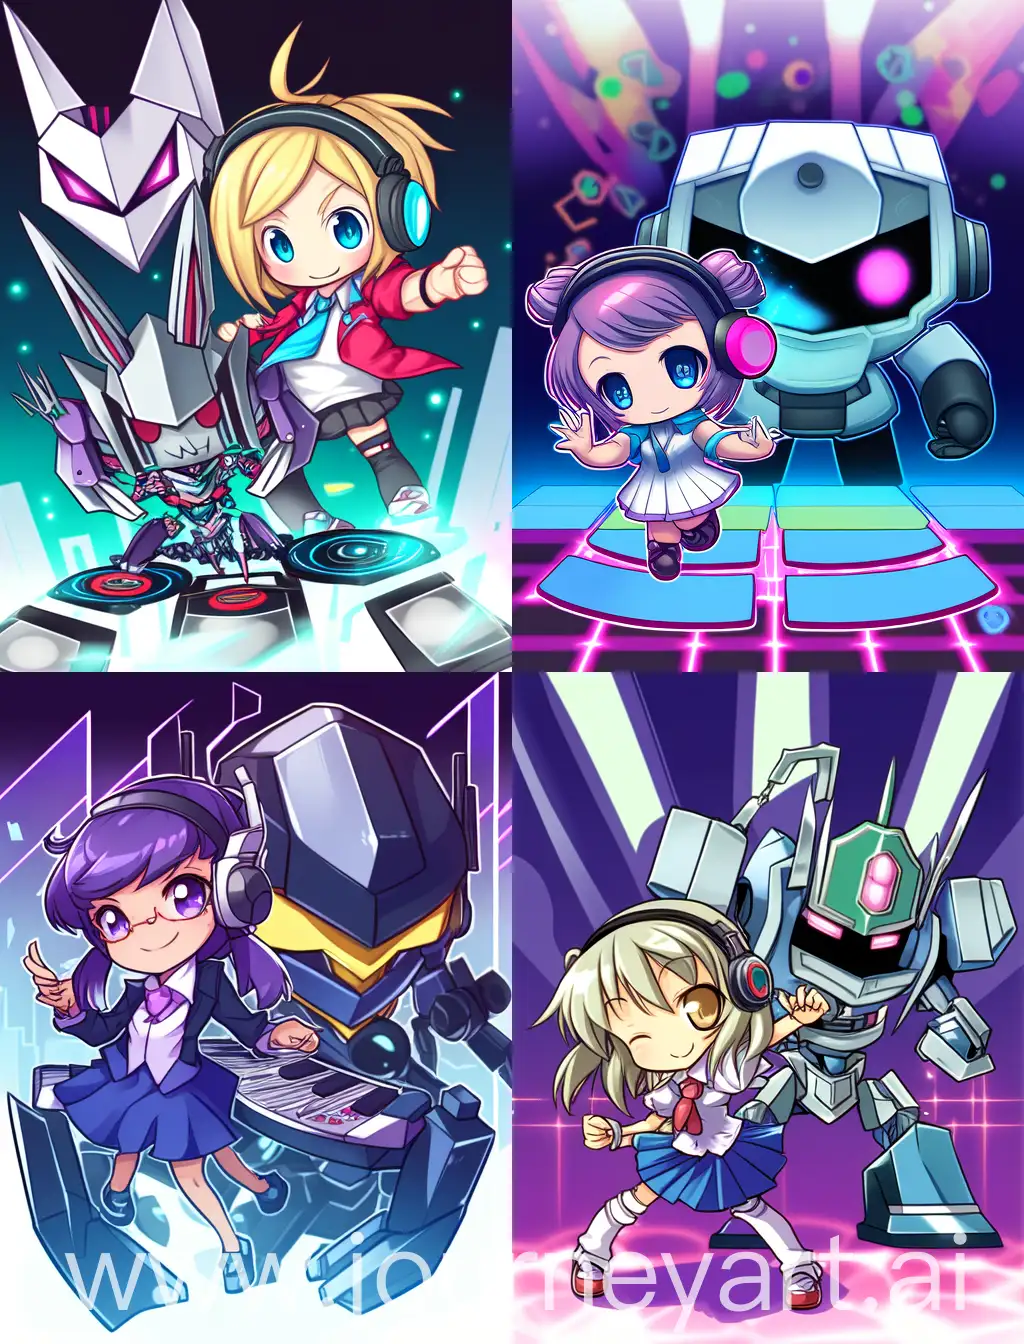 chibi robot and anime girl playing dj, with abstract background, 